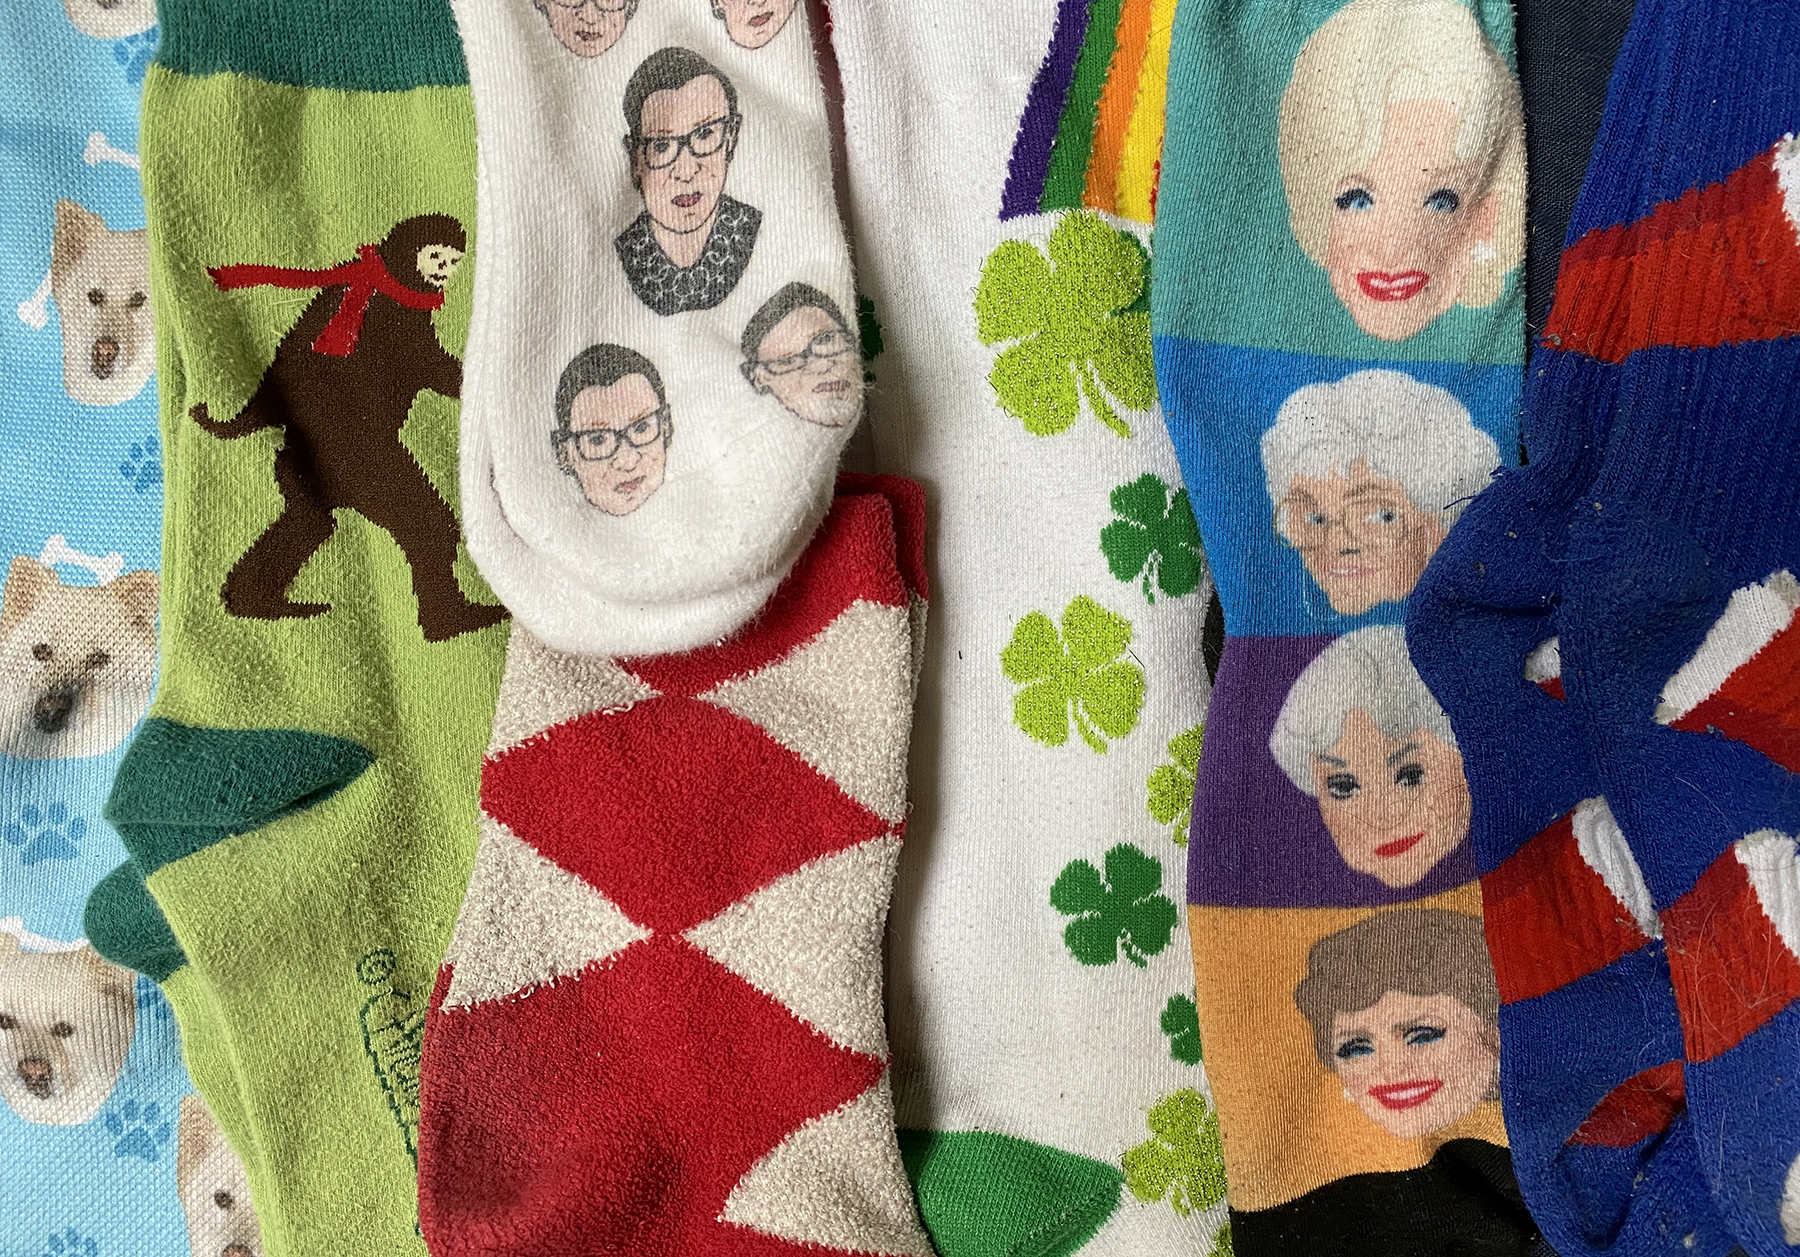 Novelty socks such as Solo cups, Golden Girls, Big Foot, and Maura McGurk’s dog.